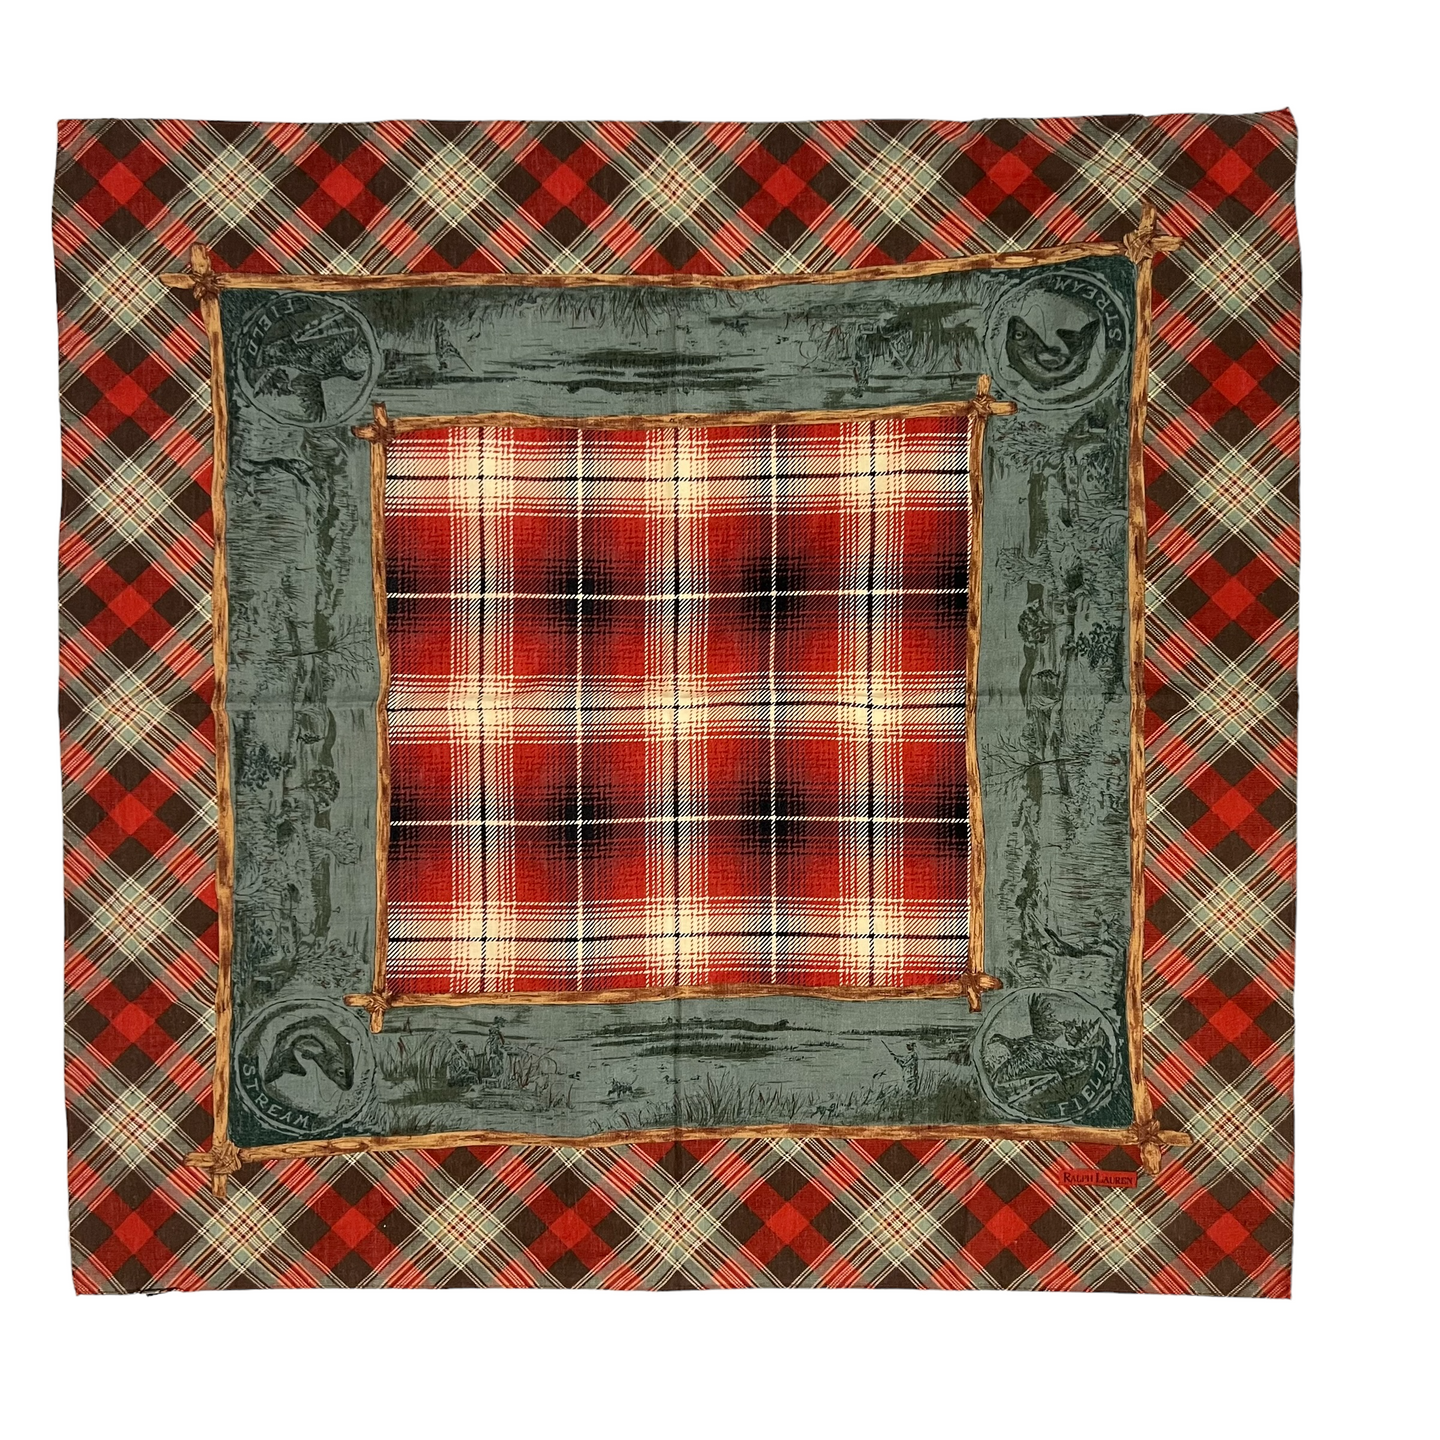 70s Ralph Lauren Square Plaid Scarf. Vintage Field & Stream Scarf. 100% Cotton. Made in Japan.